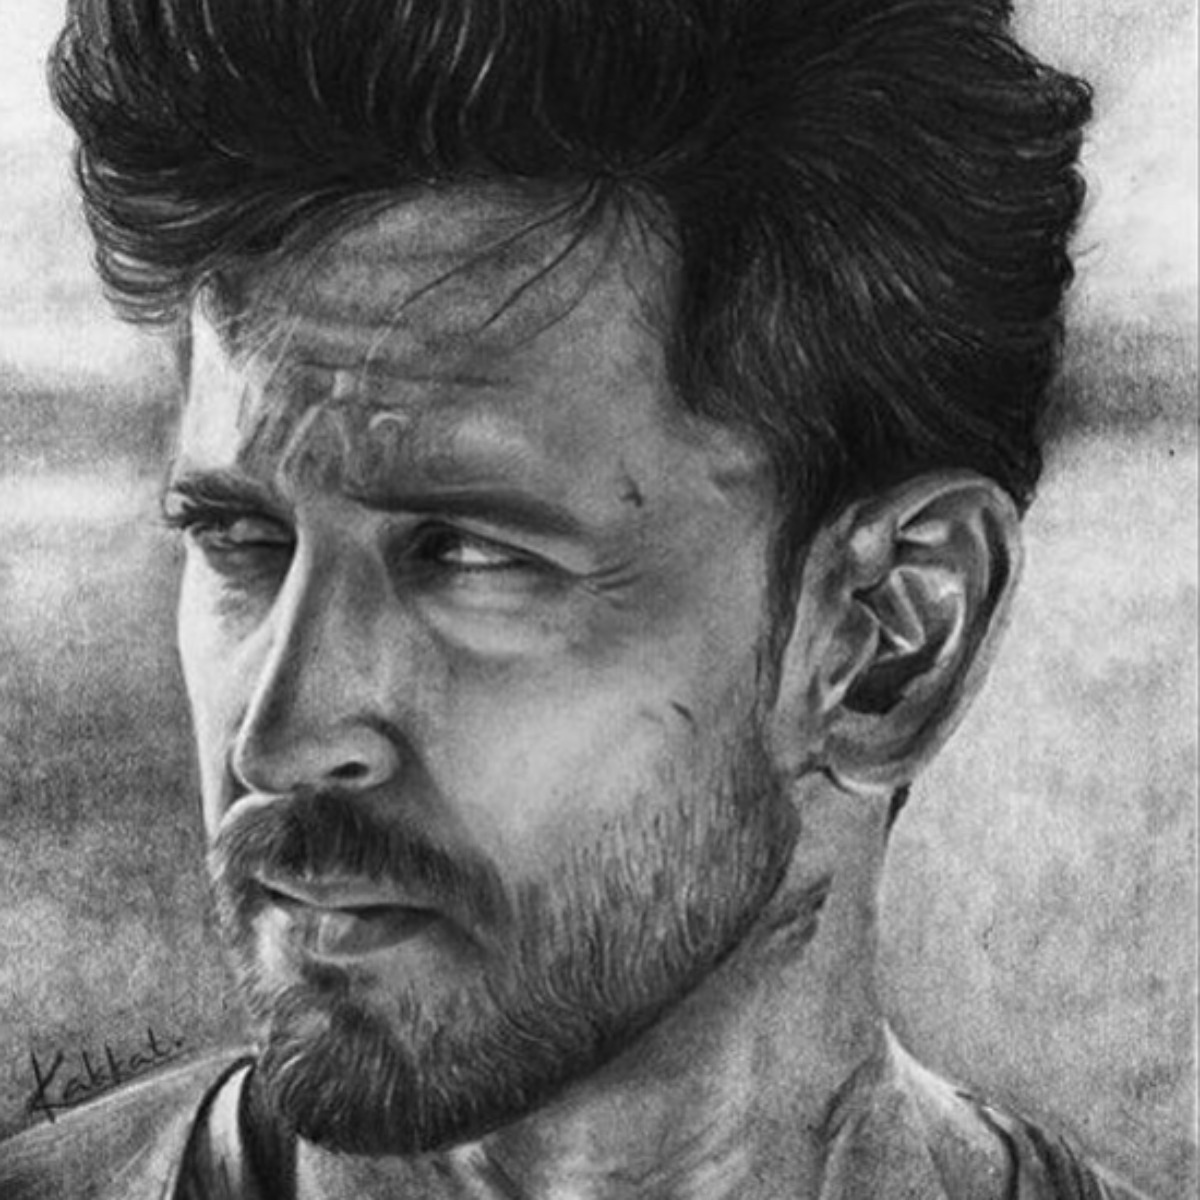 Sketches Of Bollywood Celebs Bollywood Celebs Sketches Bollywood Celebs  Painting Sketch Of Shahrukh Khan  Filmibeat